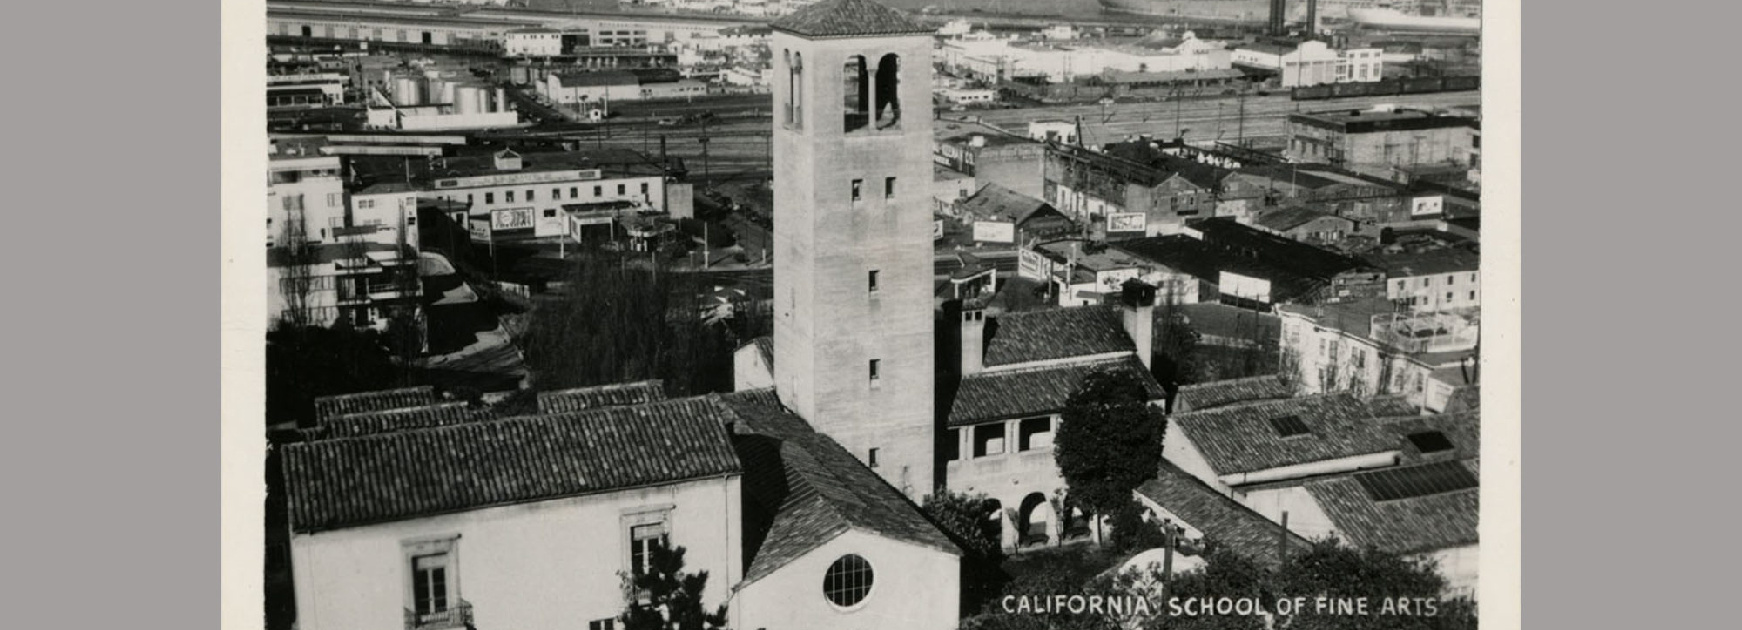 A black and white postcard showing an aeriel view of a group of buildings next to a body of water.